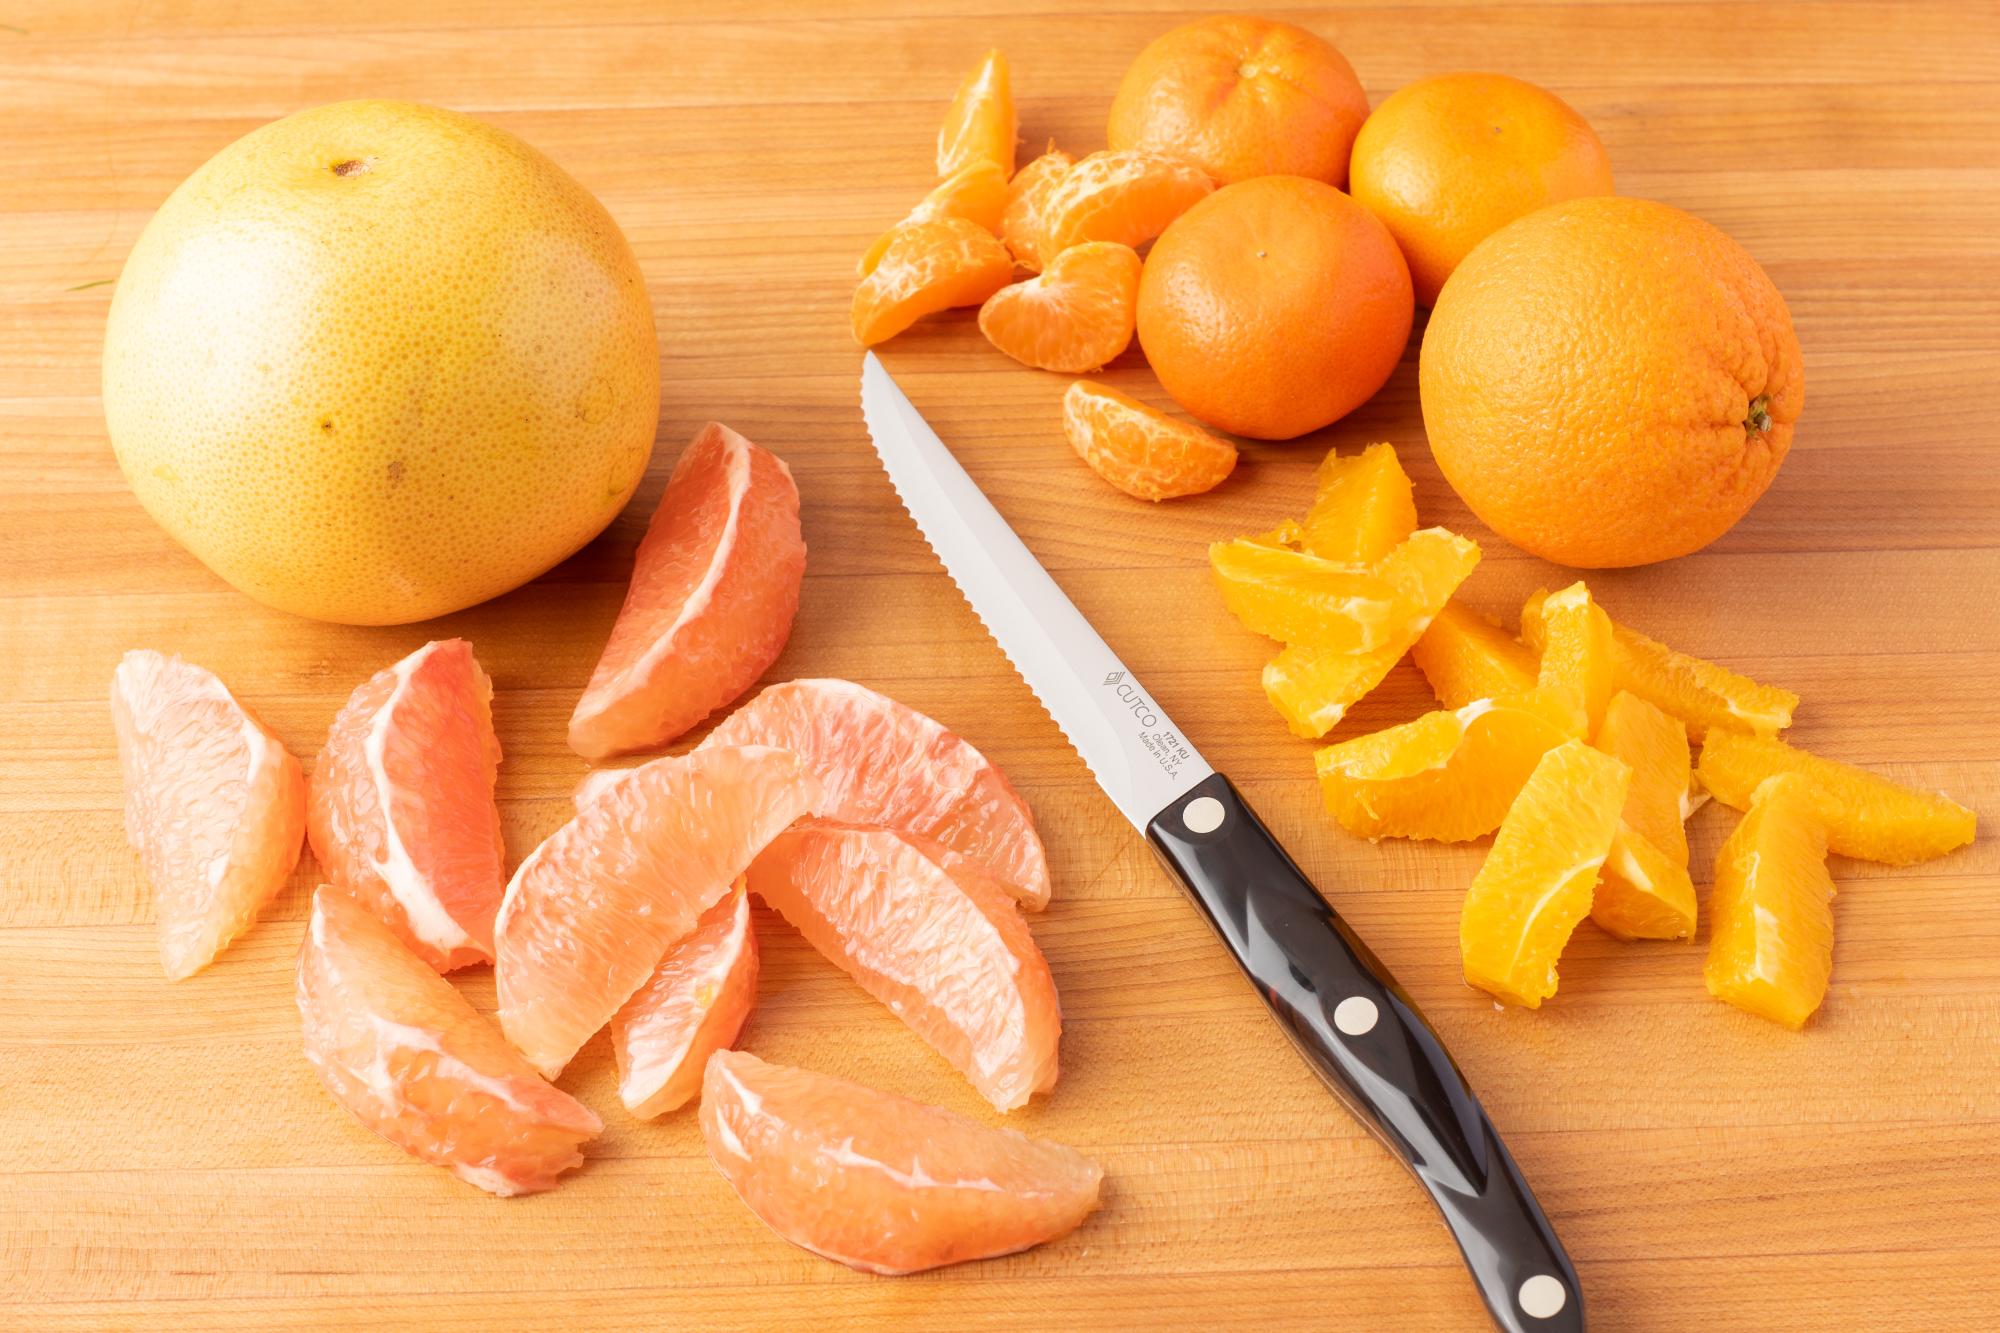 Peel and cut the citrus with a Trimmer.